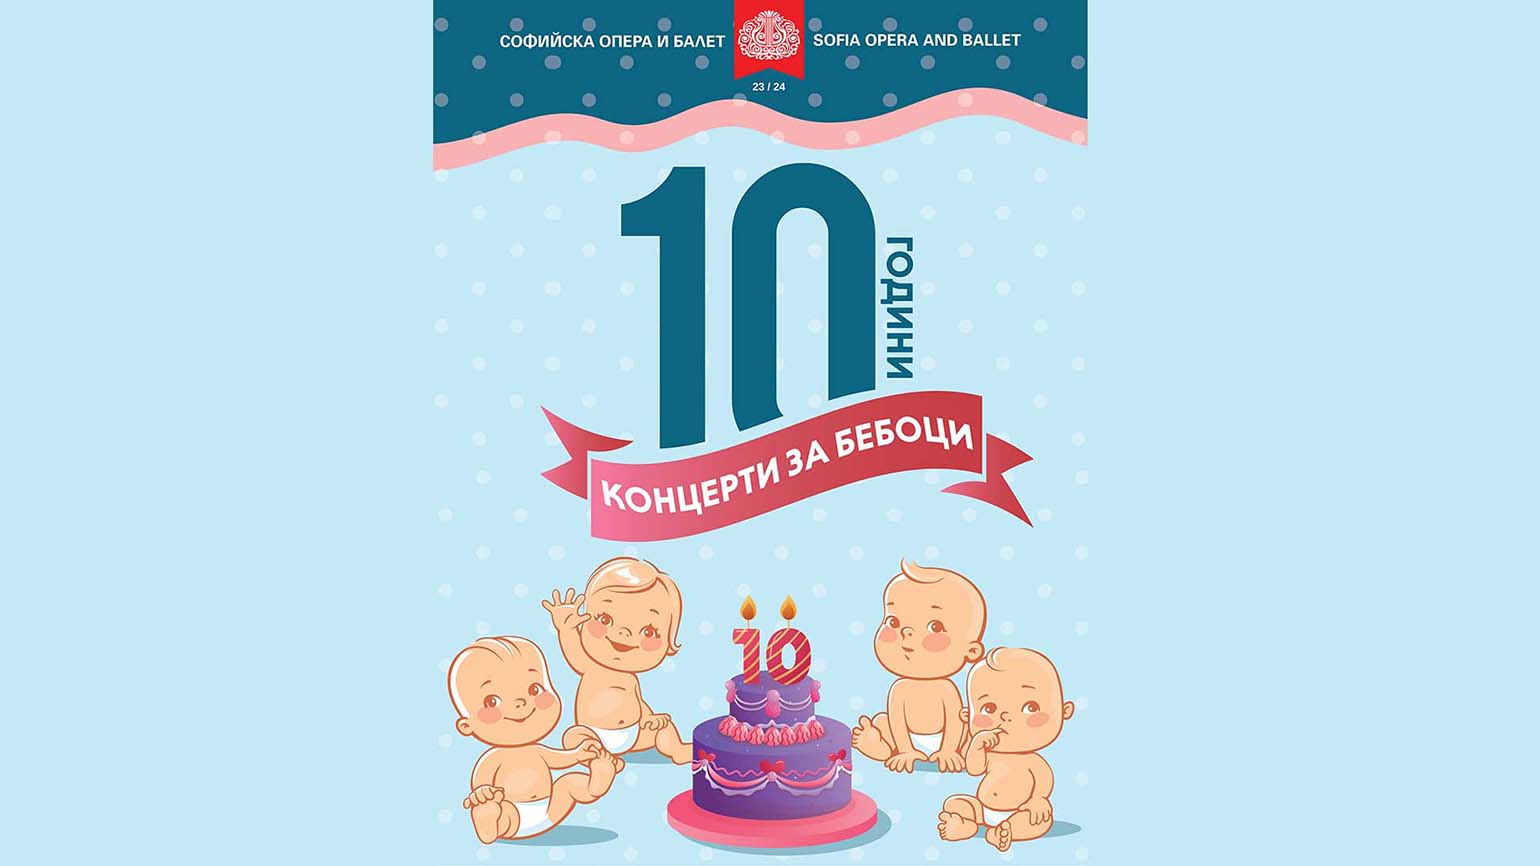 Ten years since the launch of Concerts for Babies